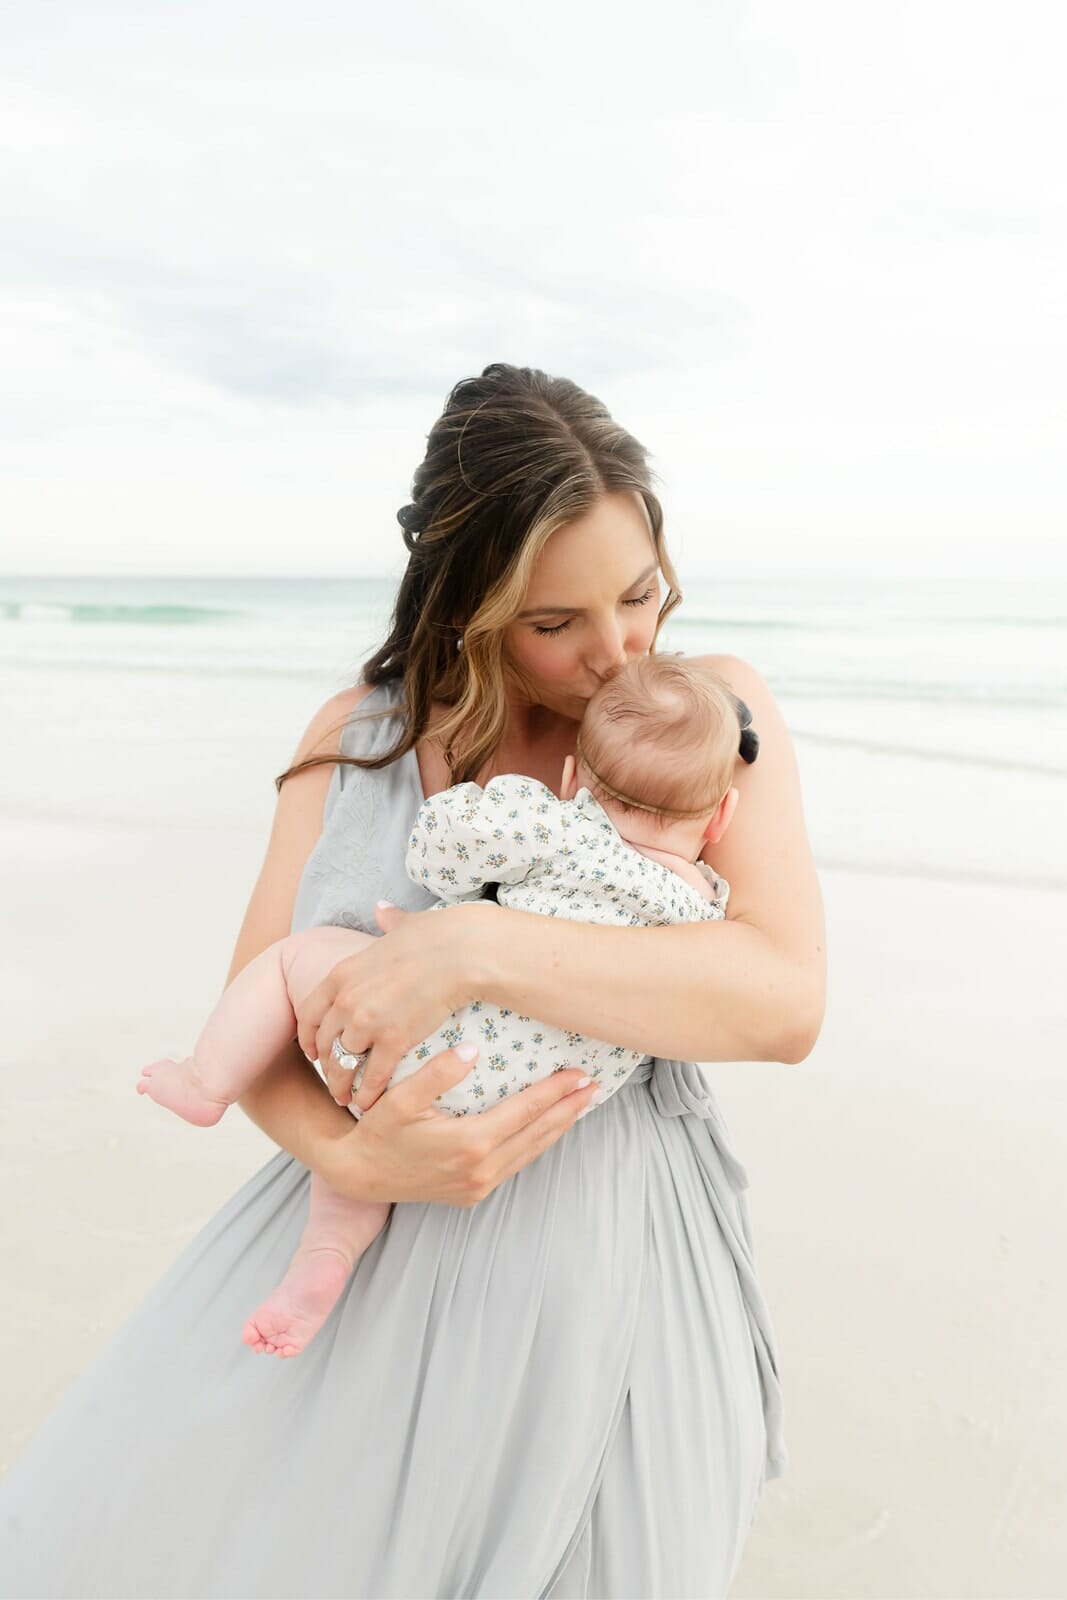 A woman in a gray dress holding a baby on the beach Destin Holiday Isle.